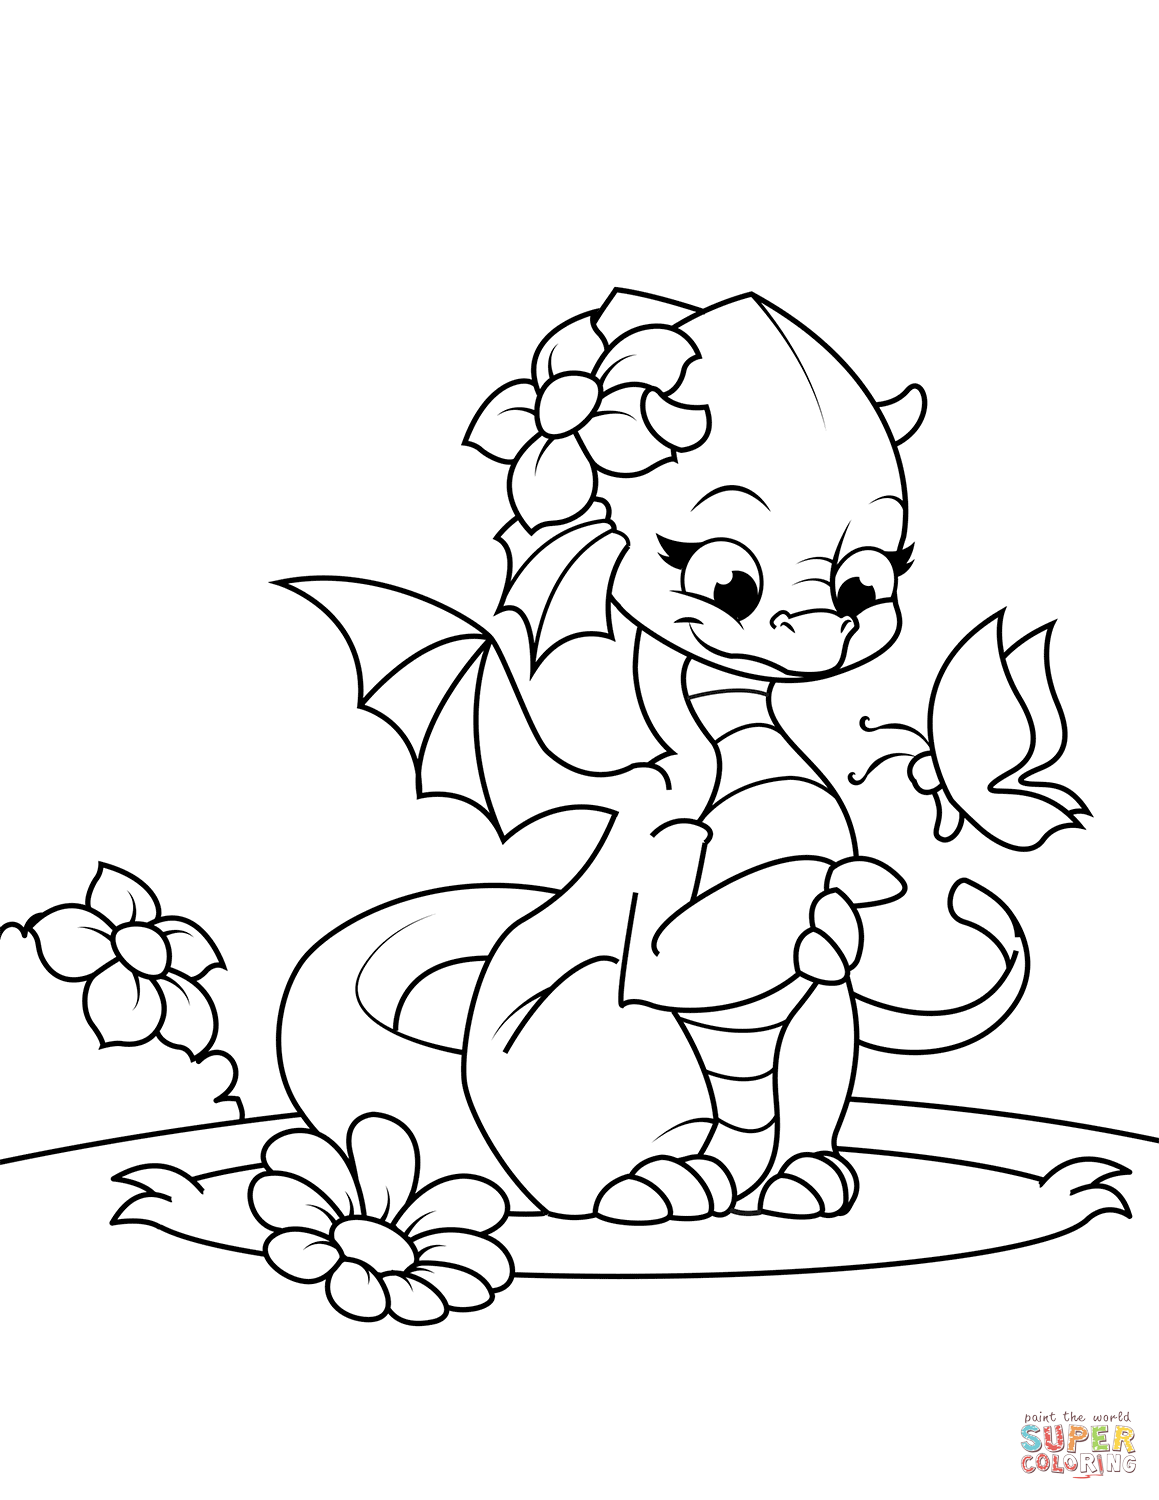 Cute Girl-Dragon Playing with Butterfly coloring page | Free Printable Coloring  Pages